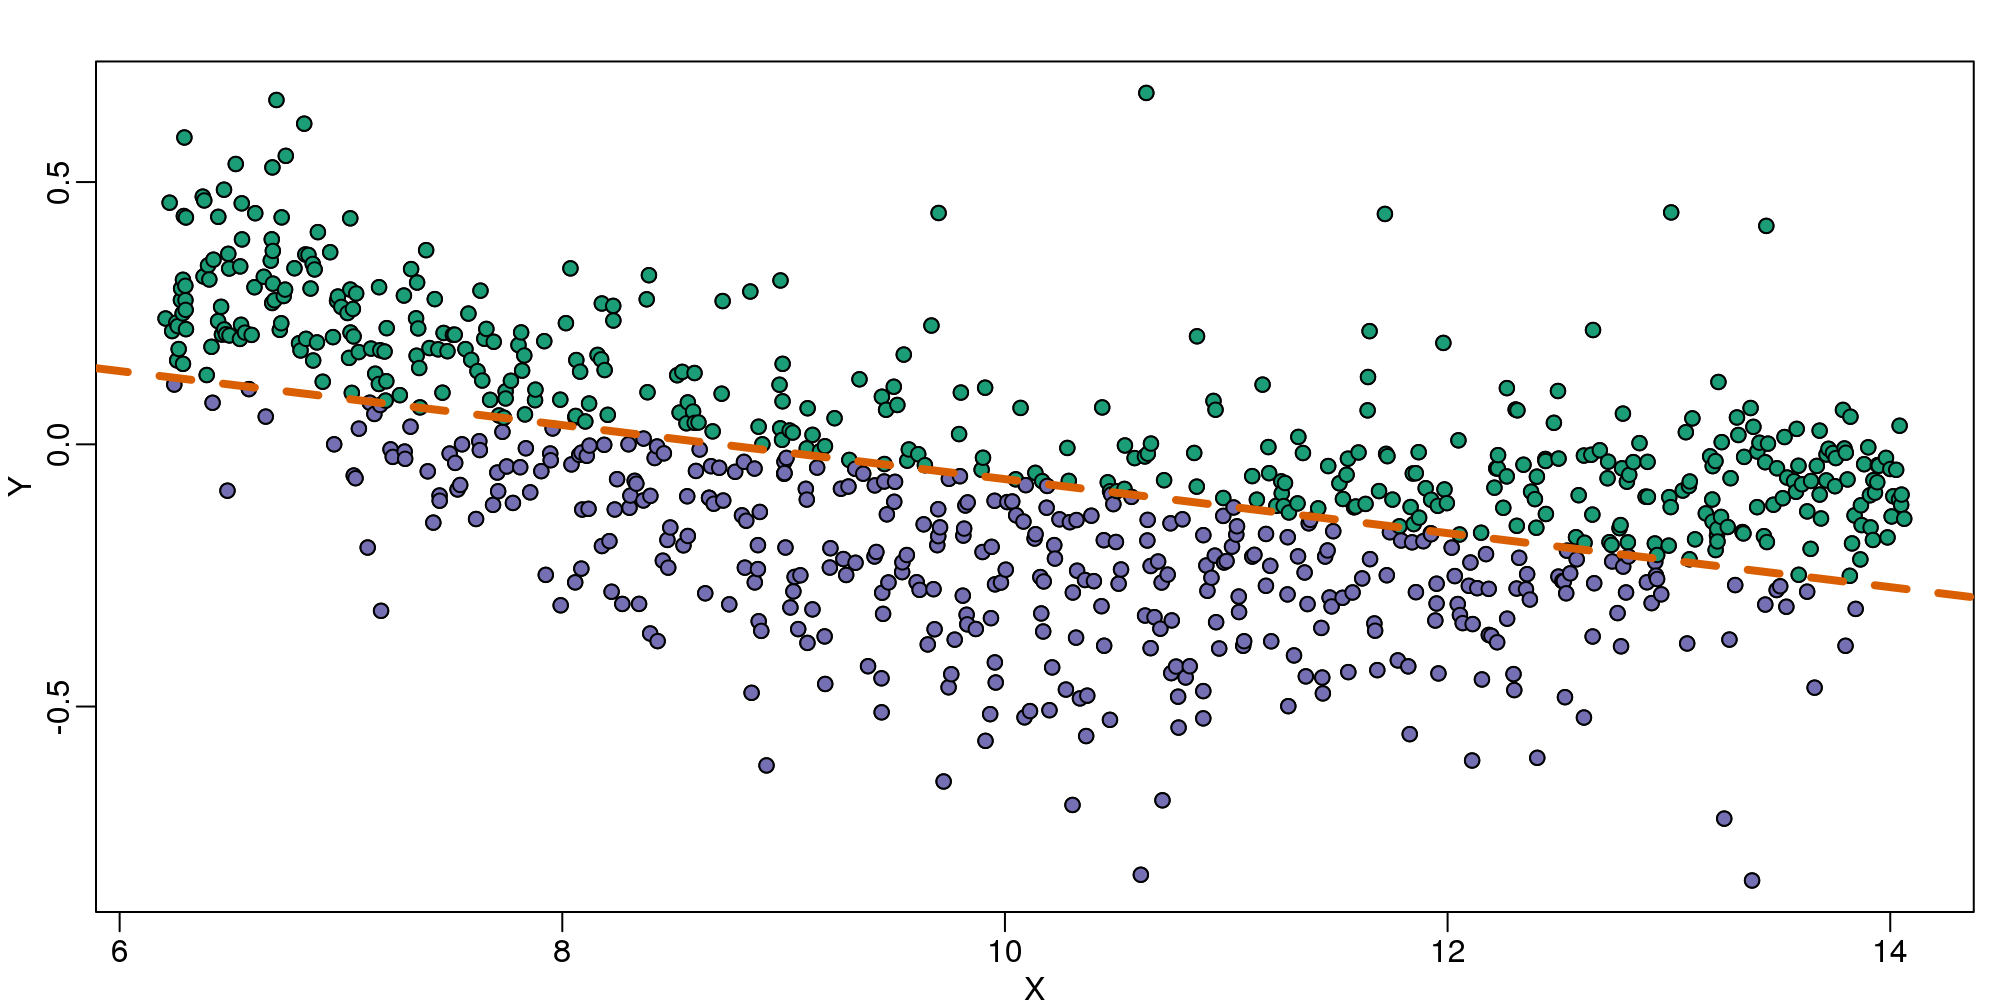 MA-plot comparing gene expression from two arrays with fitted regression line. The two colors represent positive and negative residuals.